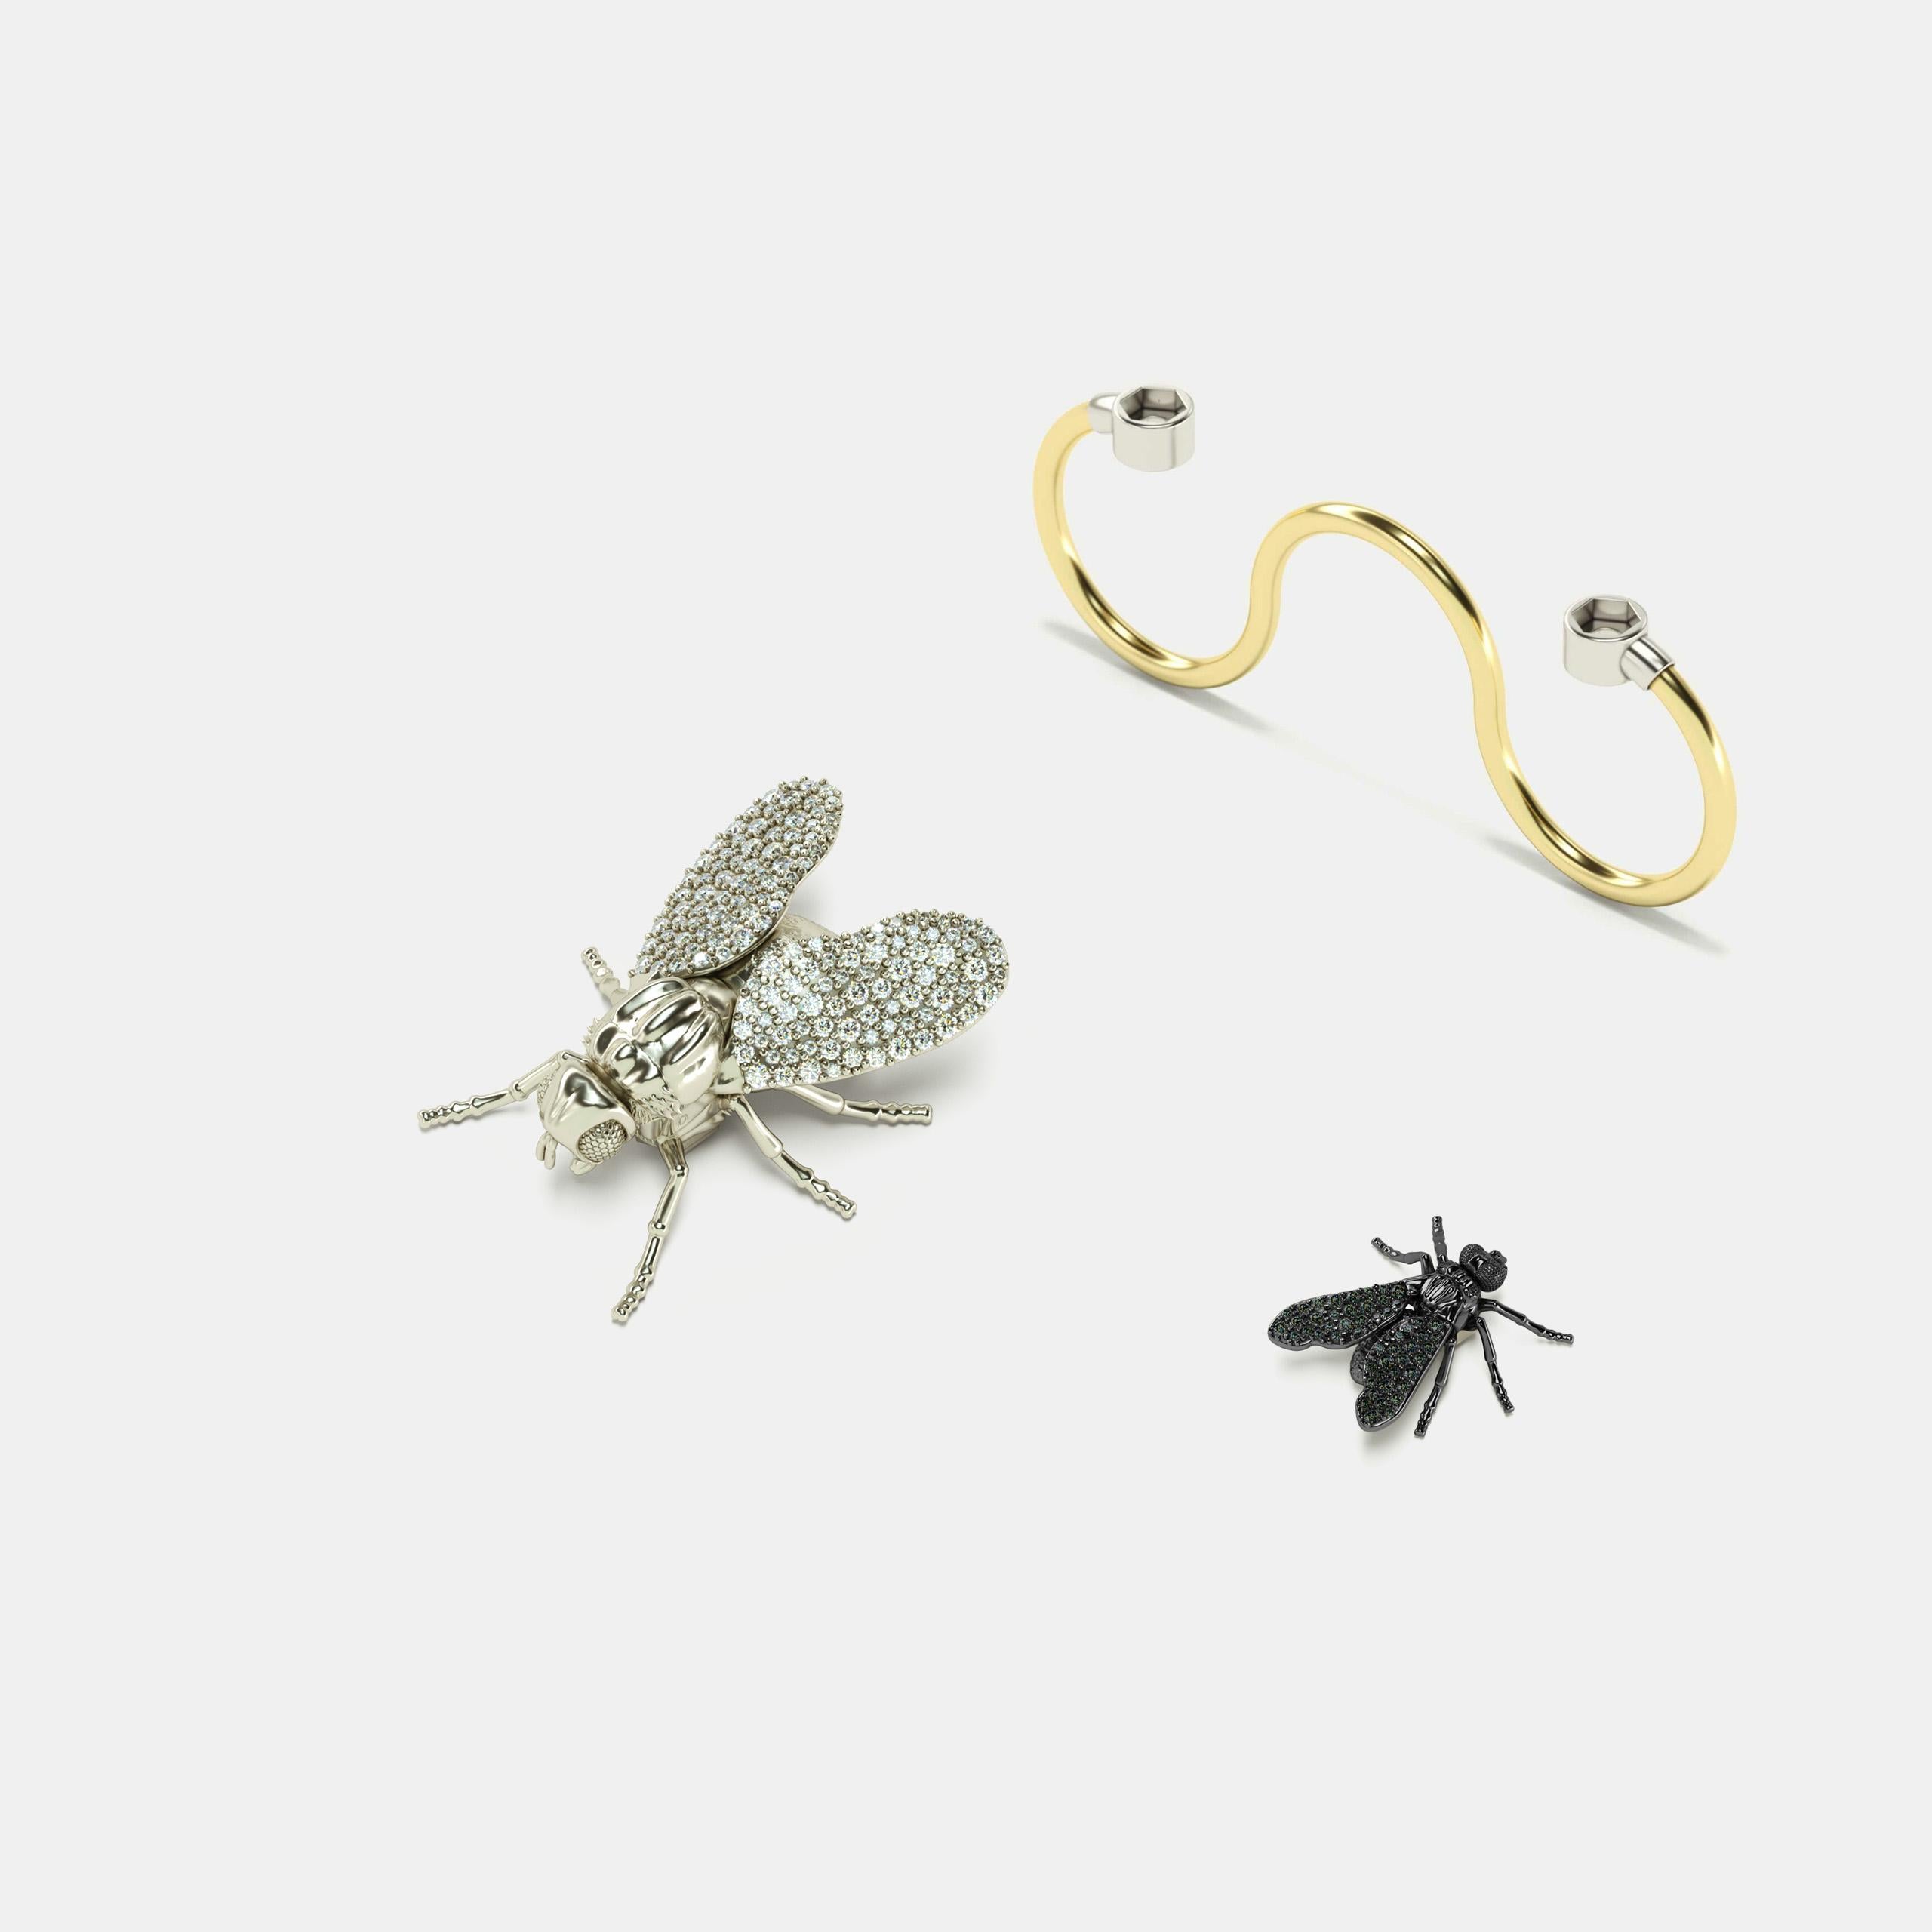 Three-Finger Cocktail Ring with Flies Full pavé white & black Diamonds
Big Fly (White Gold, 18K) with 160u. (1mm Ø) H/SI
Fly (Black Gold, 18K) with 44u. (1mm Ø)


ECH JEWELRY, Ode to the Revolution in Fine Jewelry!  
The owner can easily dismount